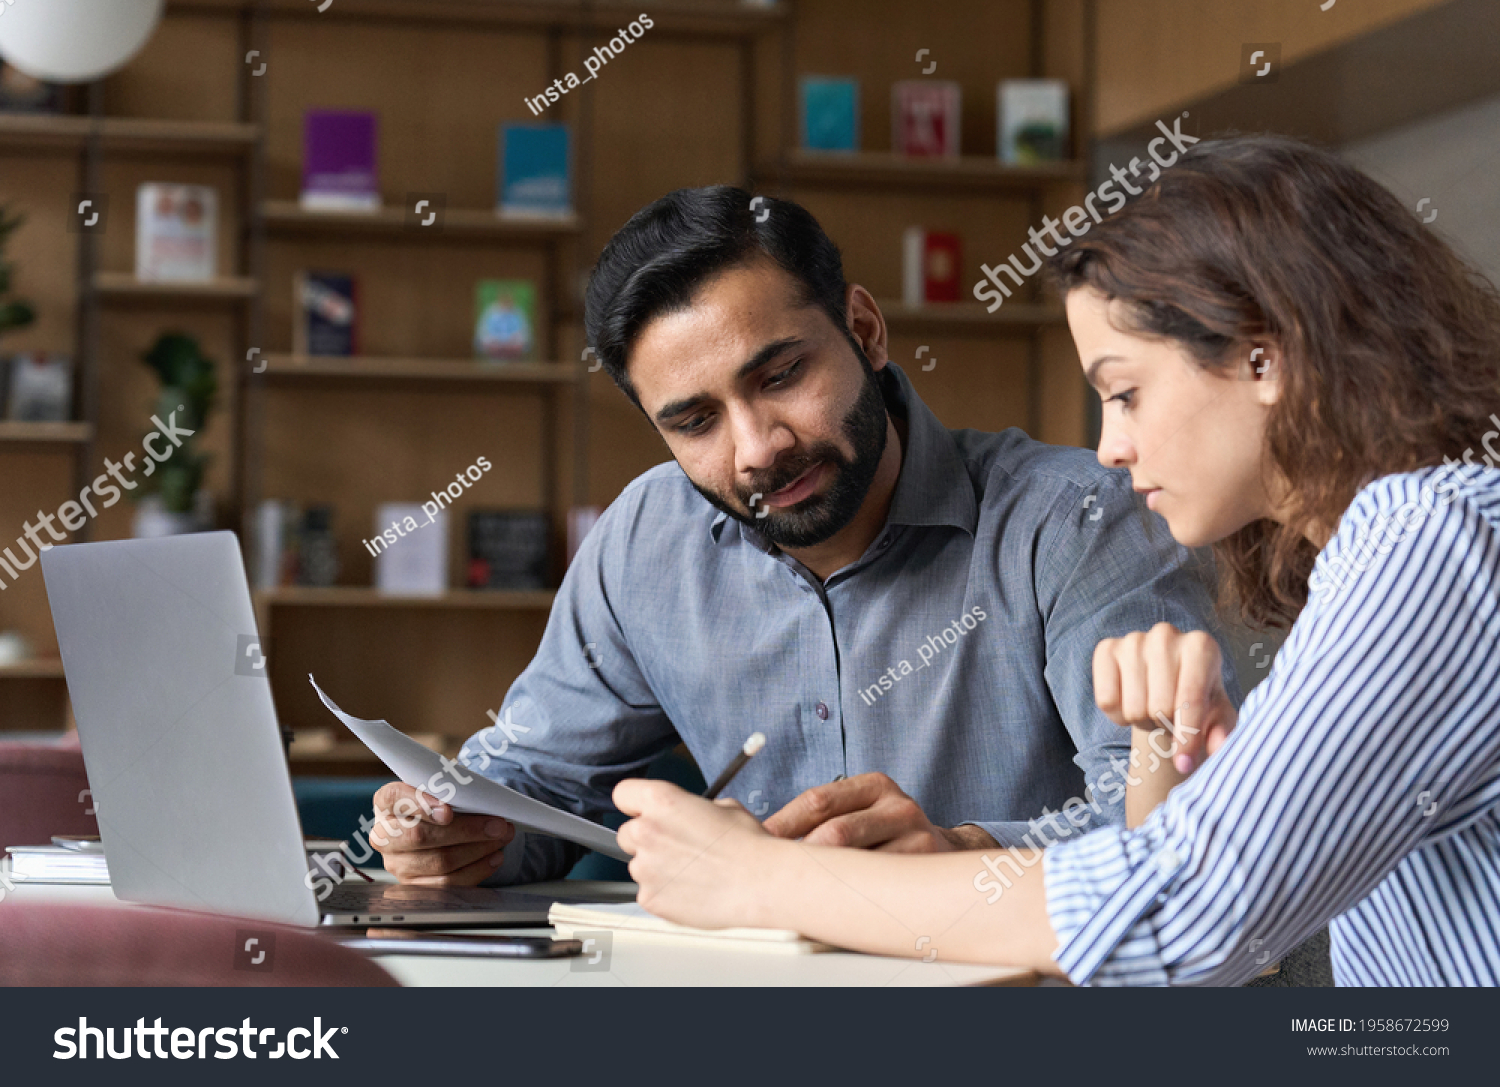 Two multiethnic professionals colleagues working together with laptop and papers in office. Indian male mentor and latin female young professional sitting in creative office space. #1958672599